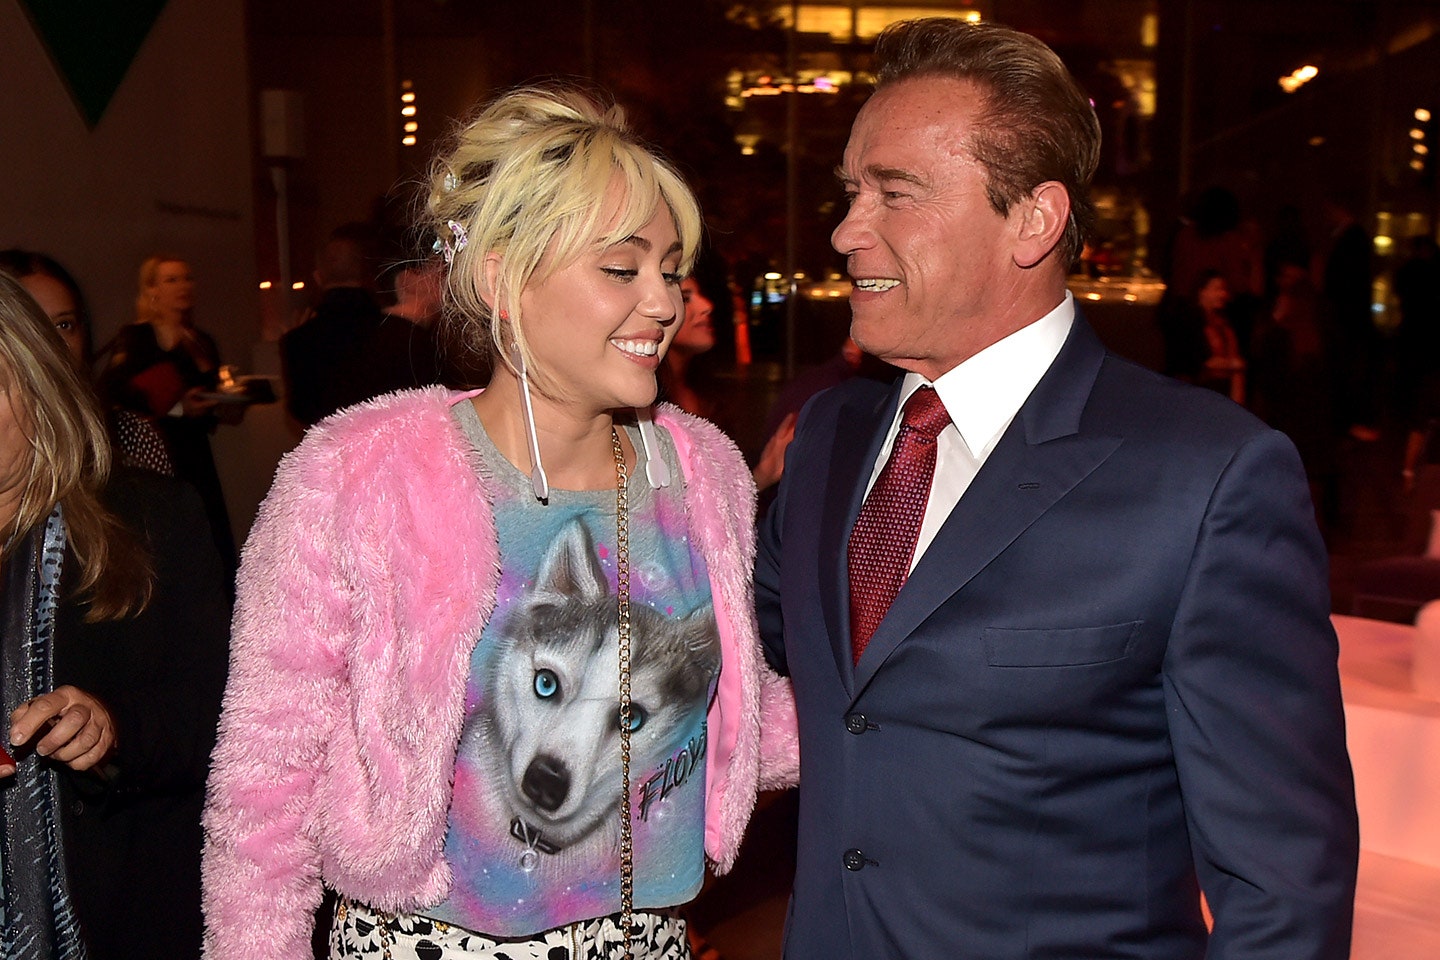 Miley Cyrus, Arnold Schwarzenegger and other celebs send their hearts out to the people of Ukraine